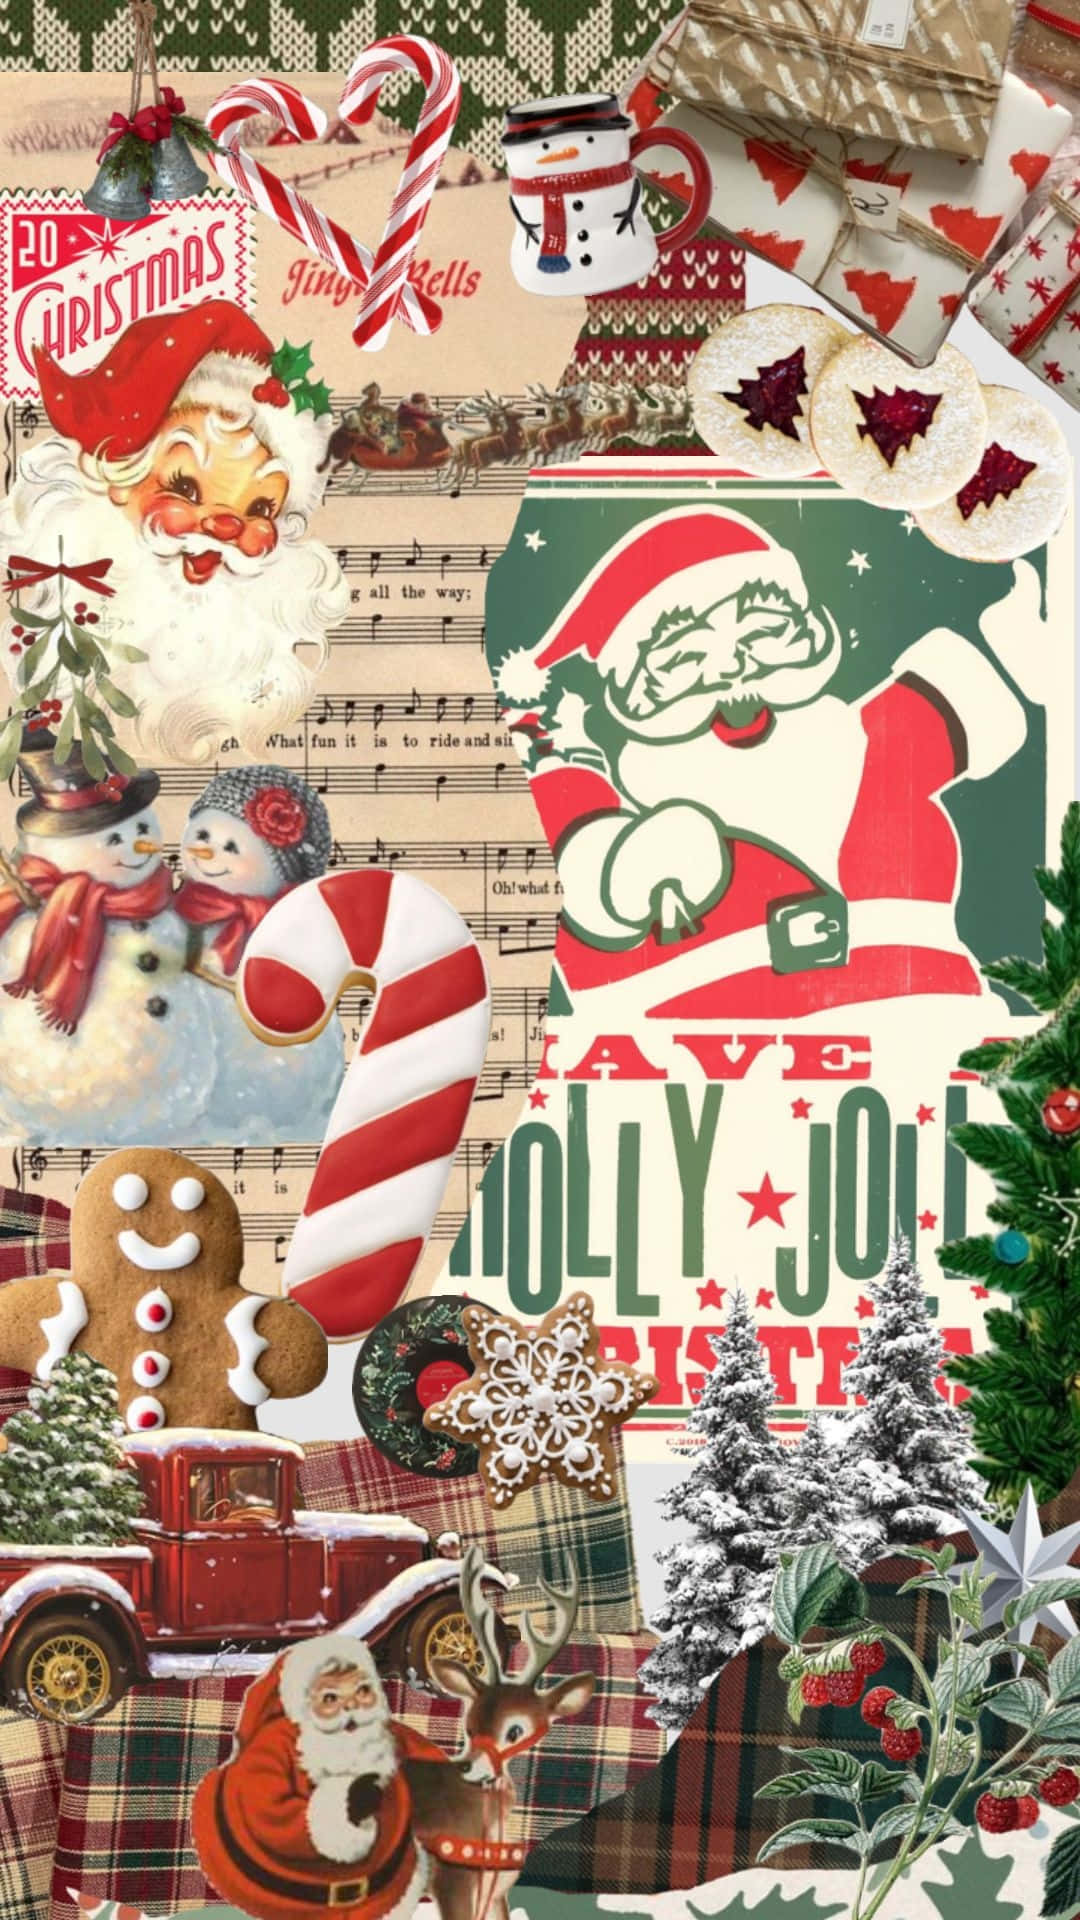 Vintage Christmas Collage Aesthetic Wallpaper